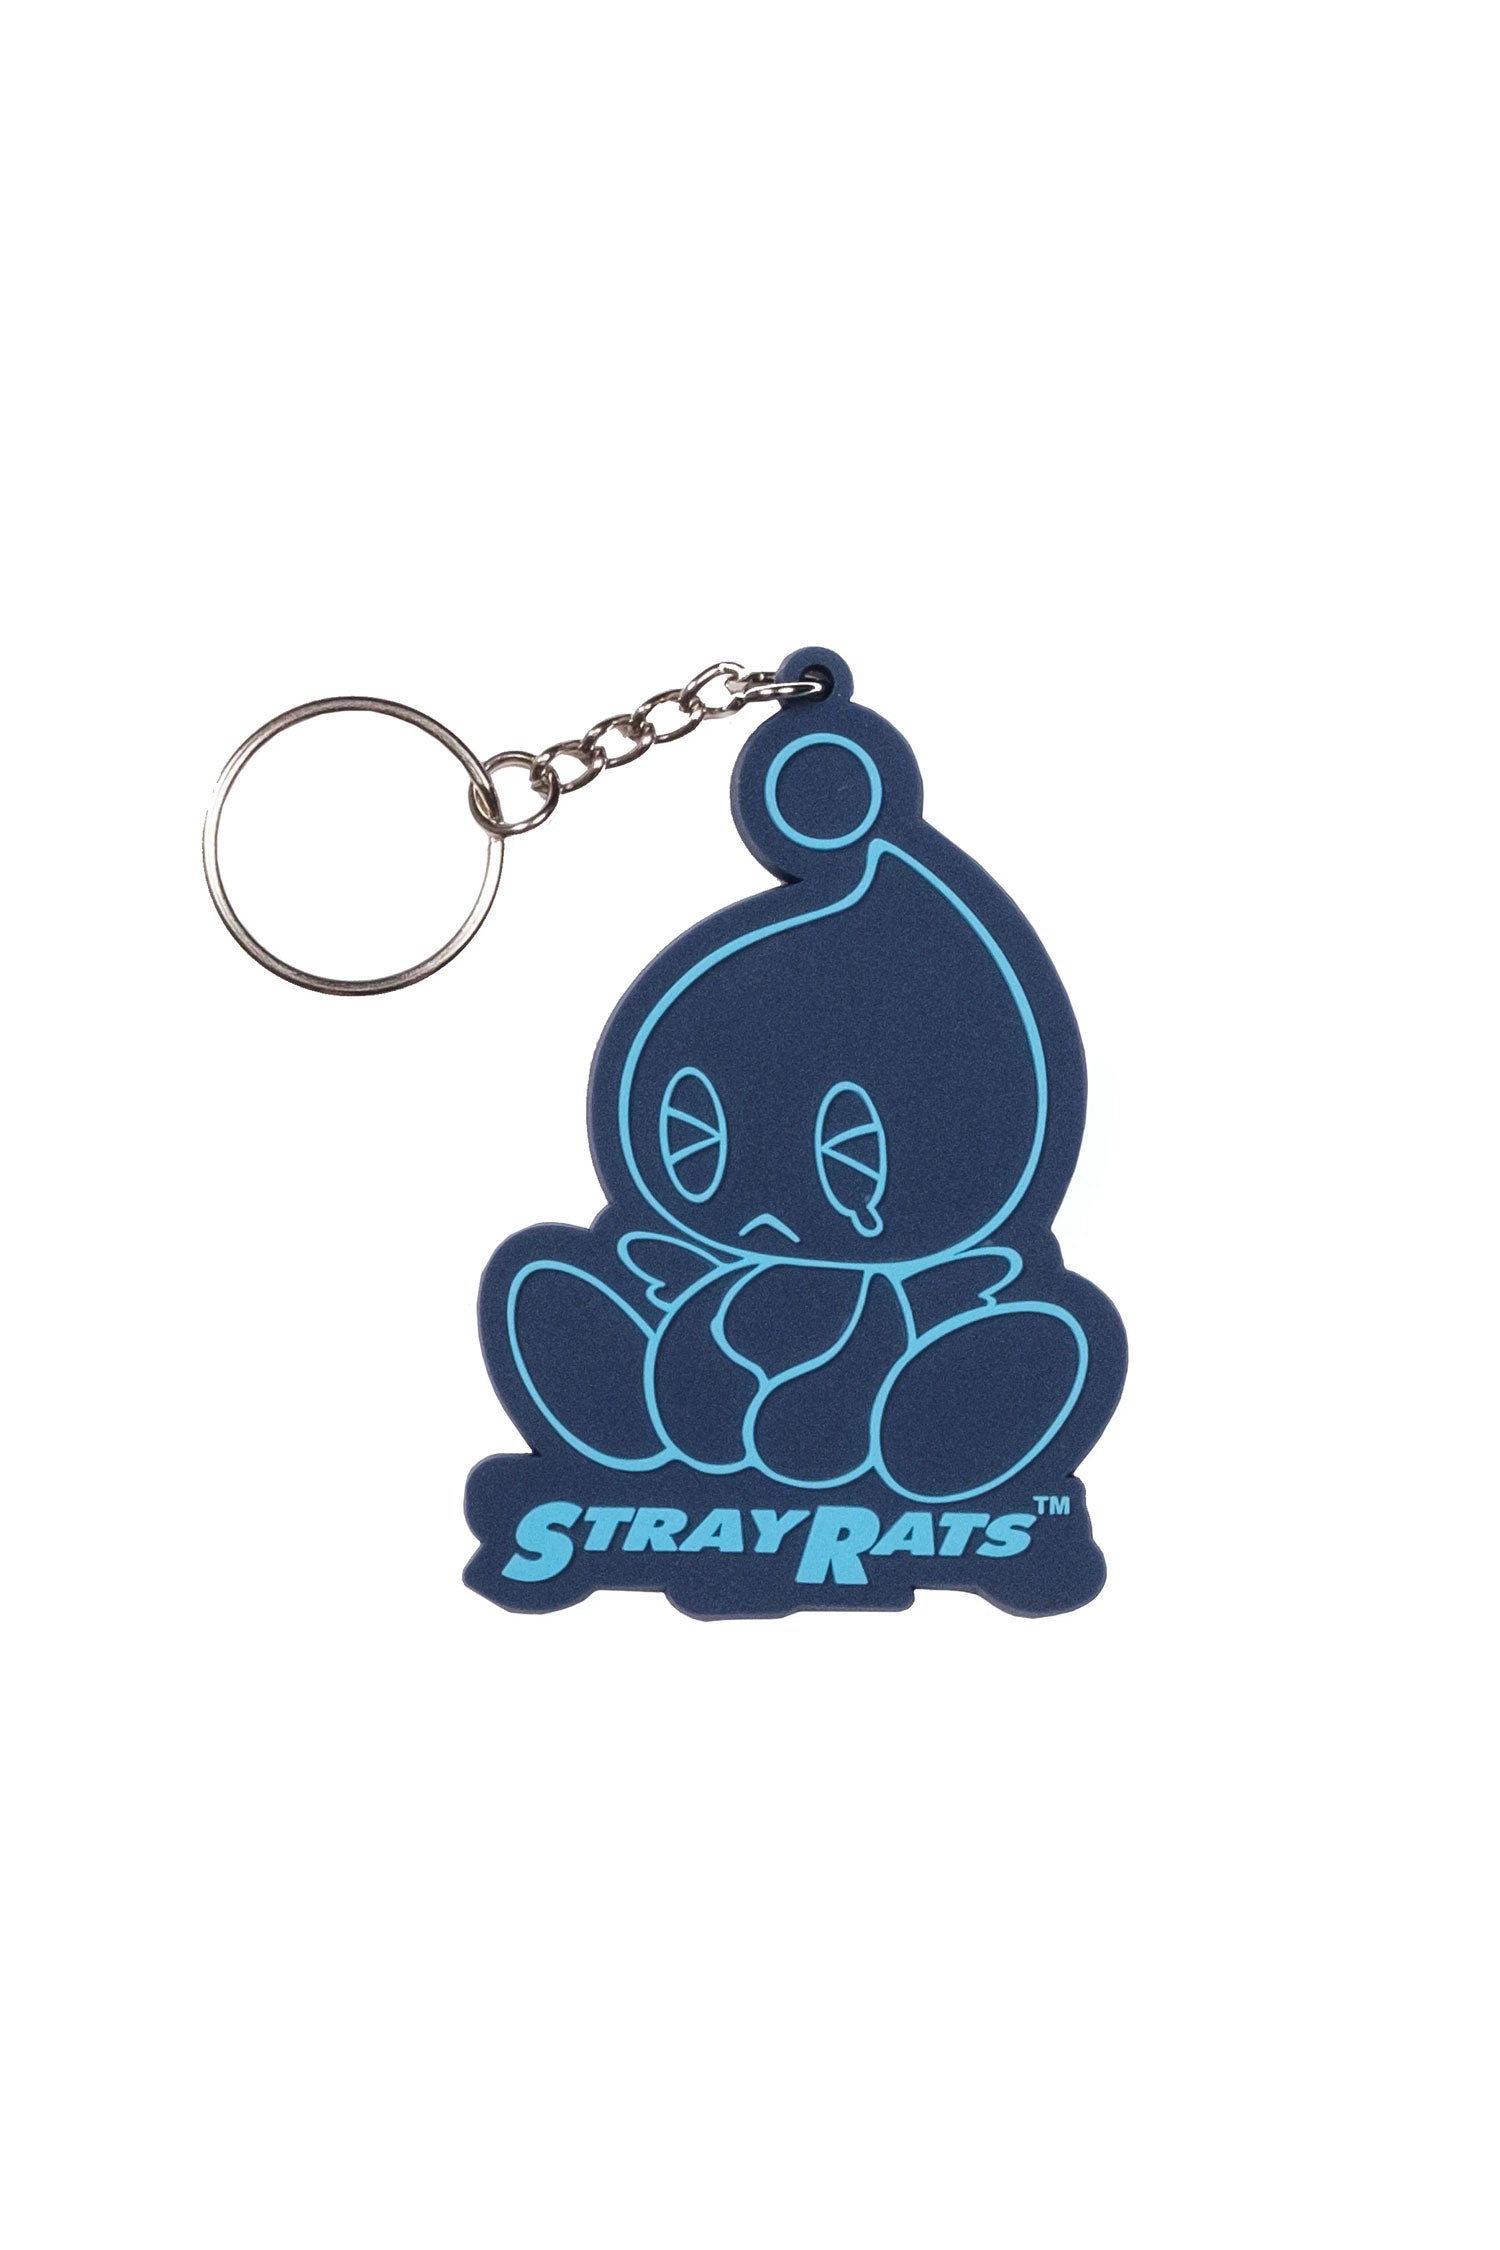 The STRAY RATS x SONIC - CHAO KEYCHAIN BLUE available online with global shipping, and in PAM Stores Melbourne and Sydney.